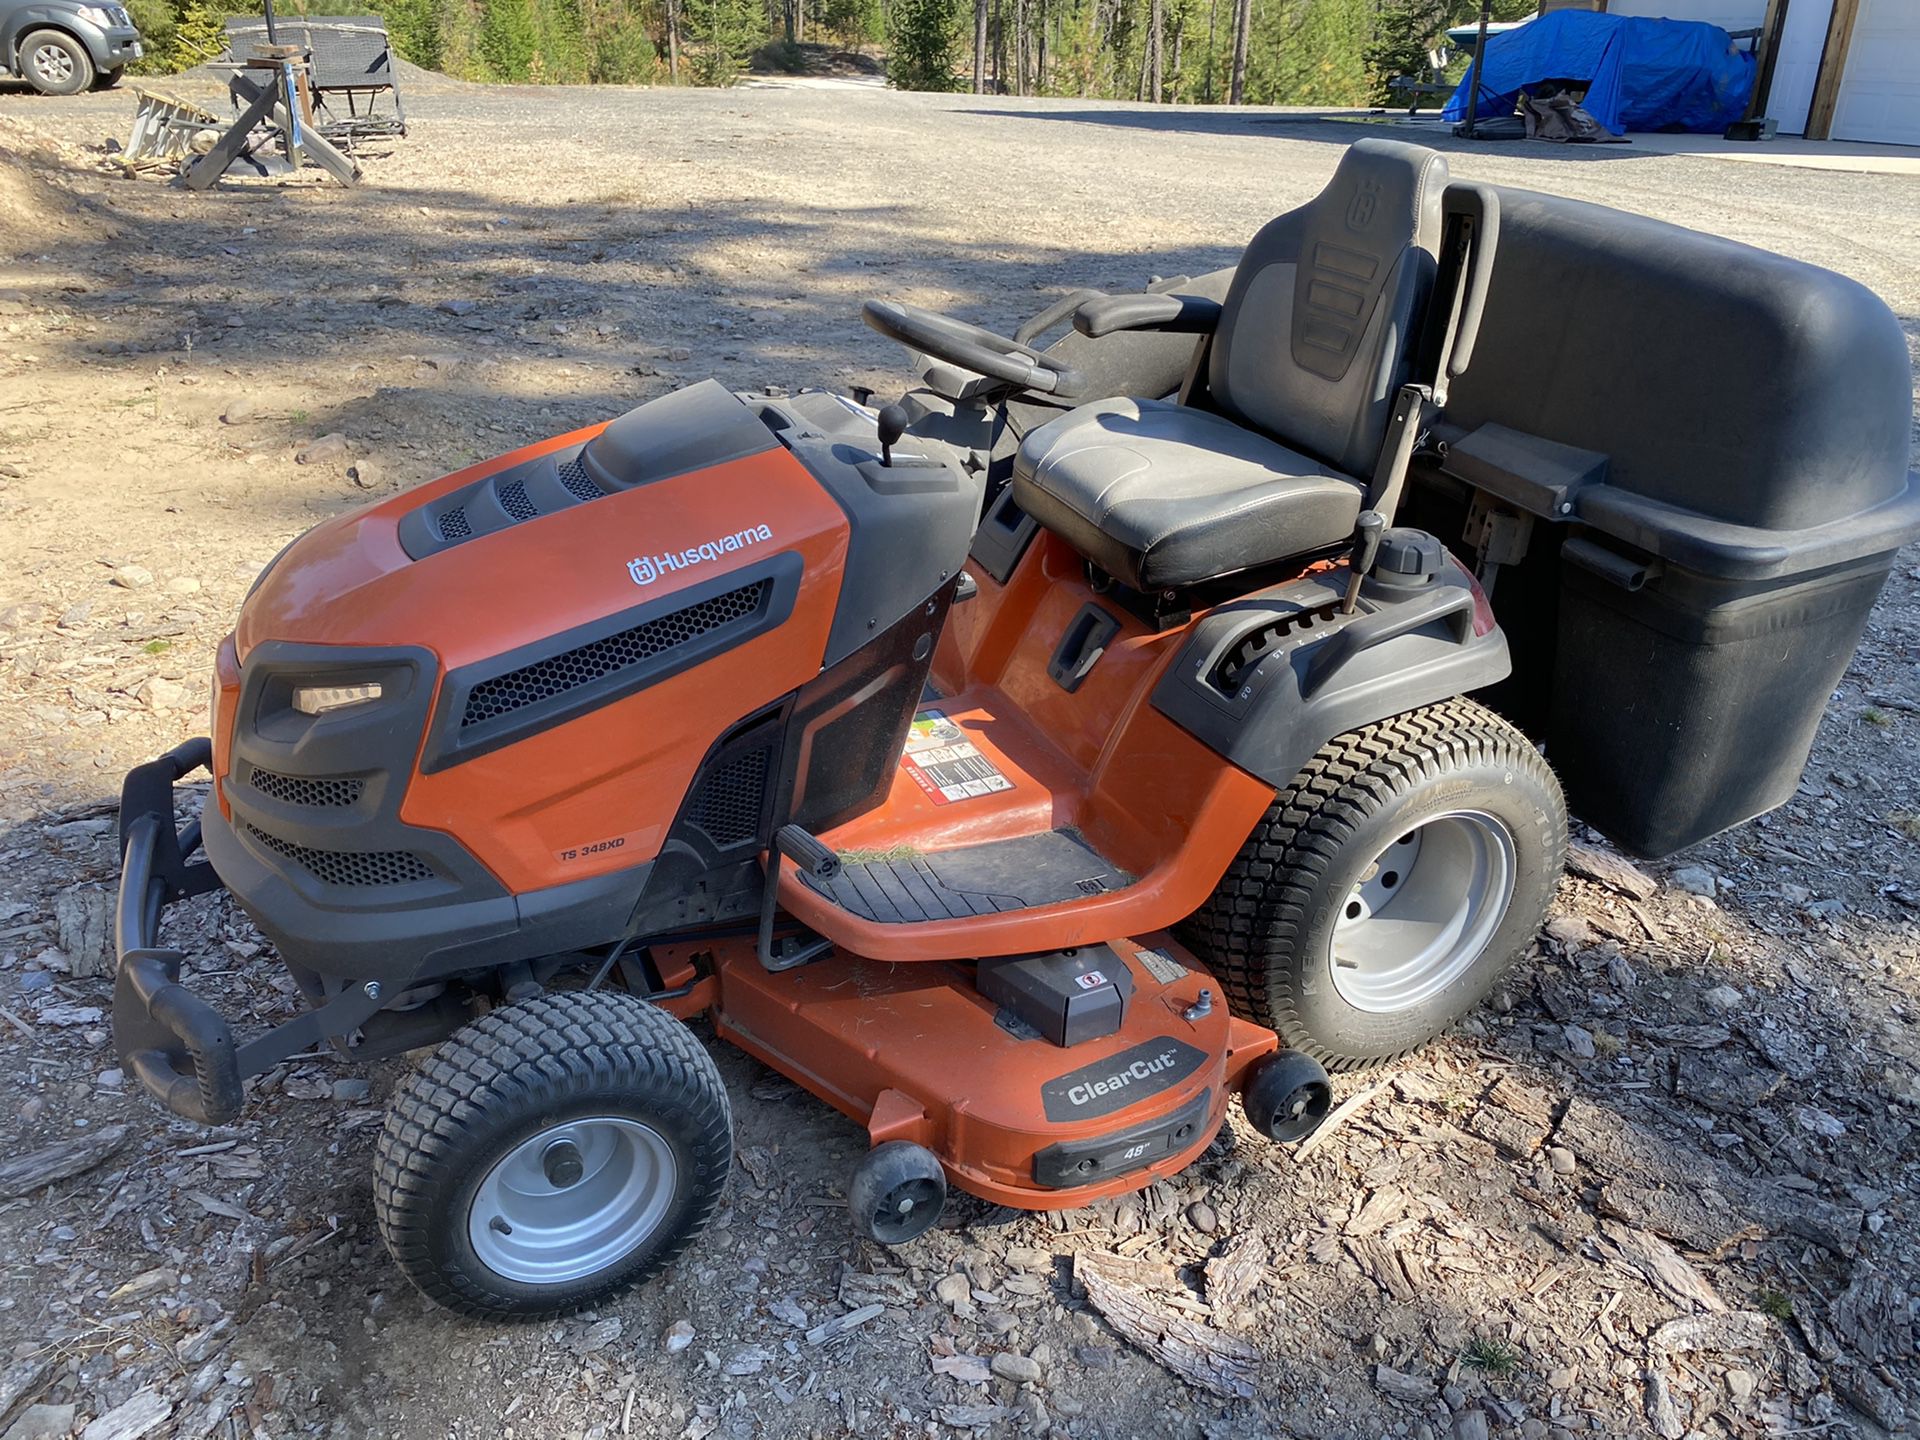 Husqvarna 48” riding lawn mower with triple bagger, diff lock, and lawn attachments